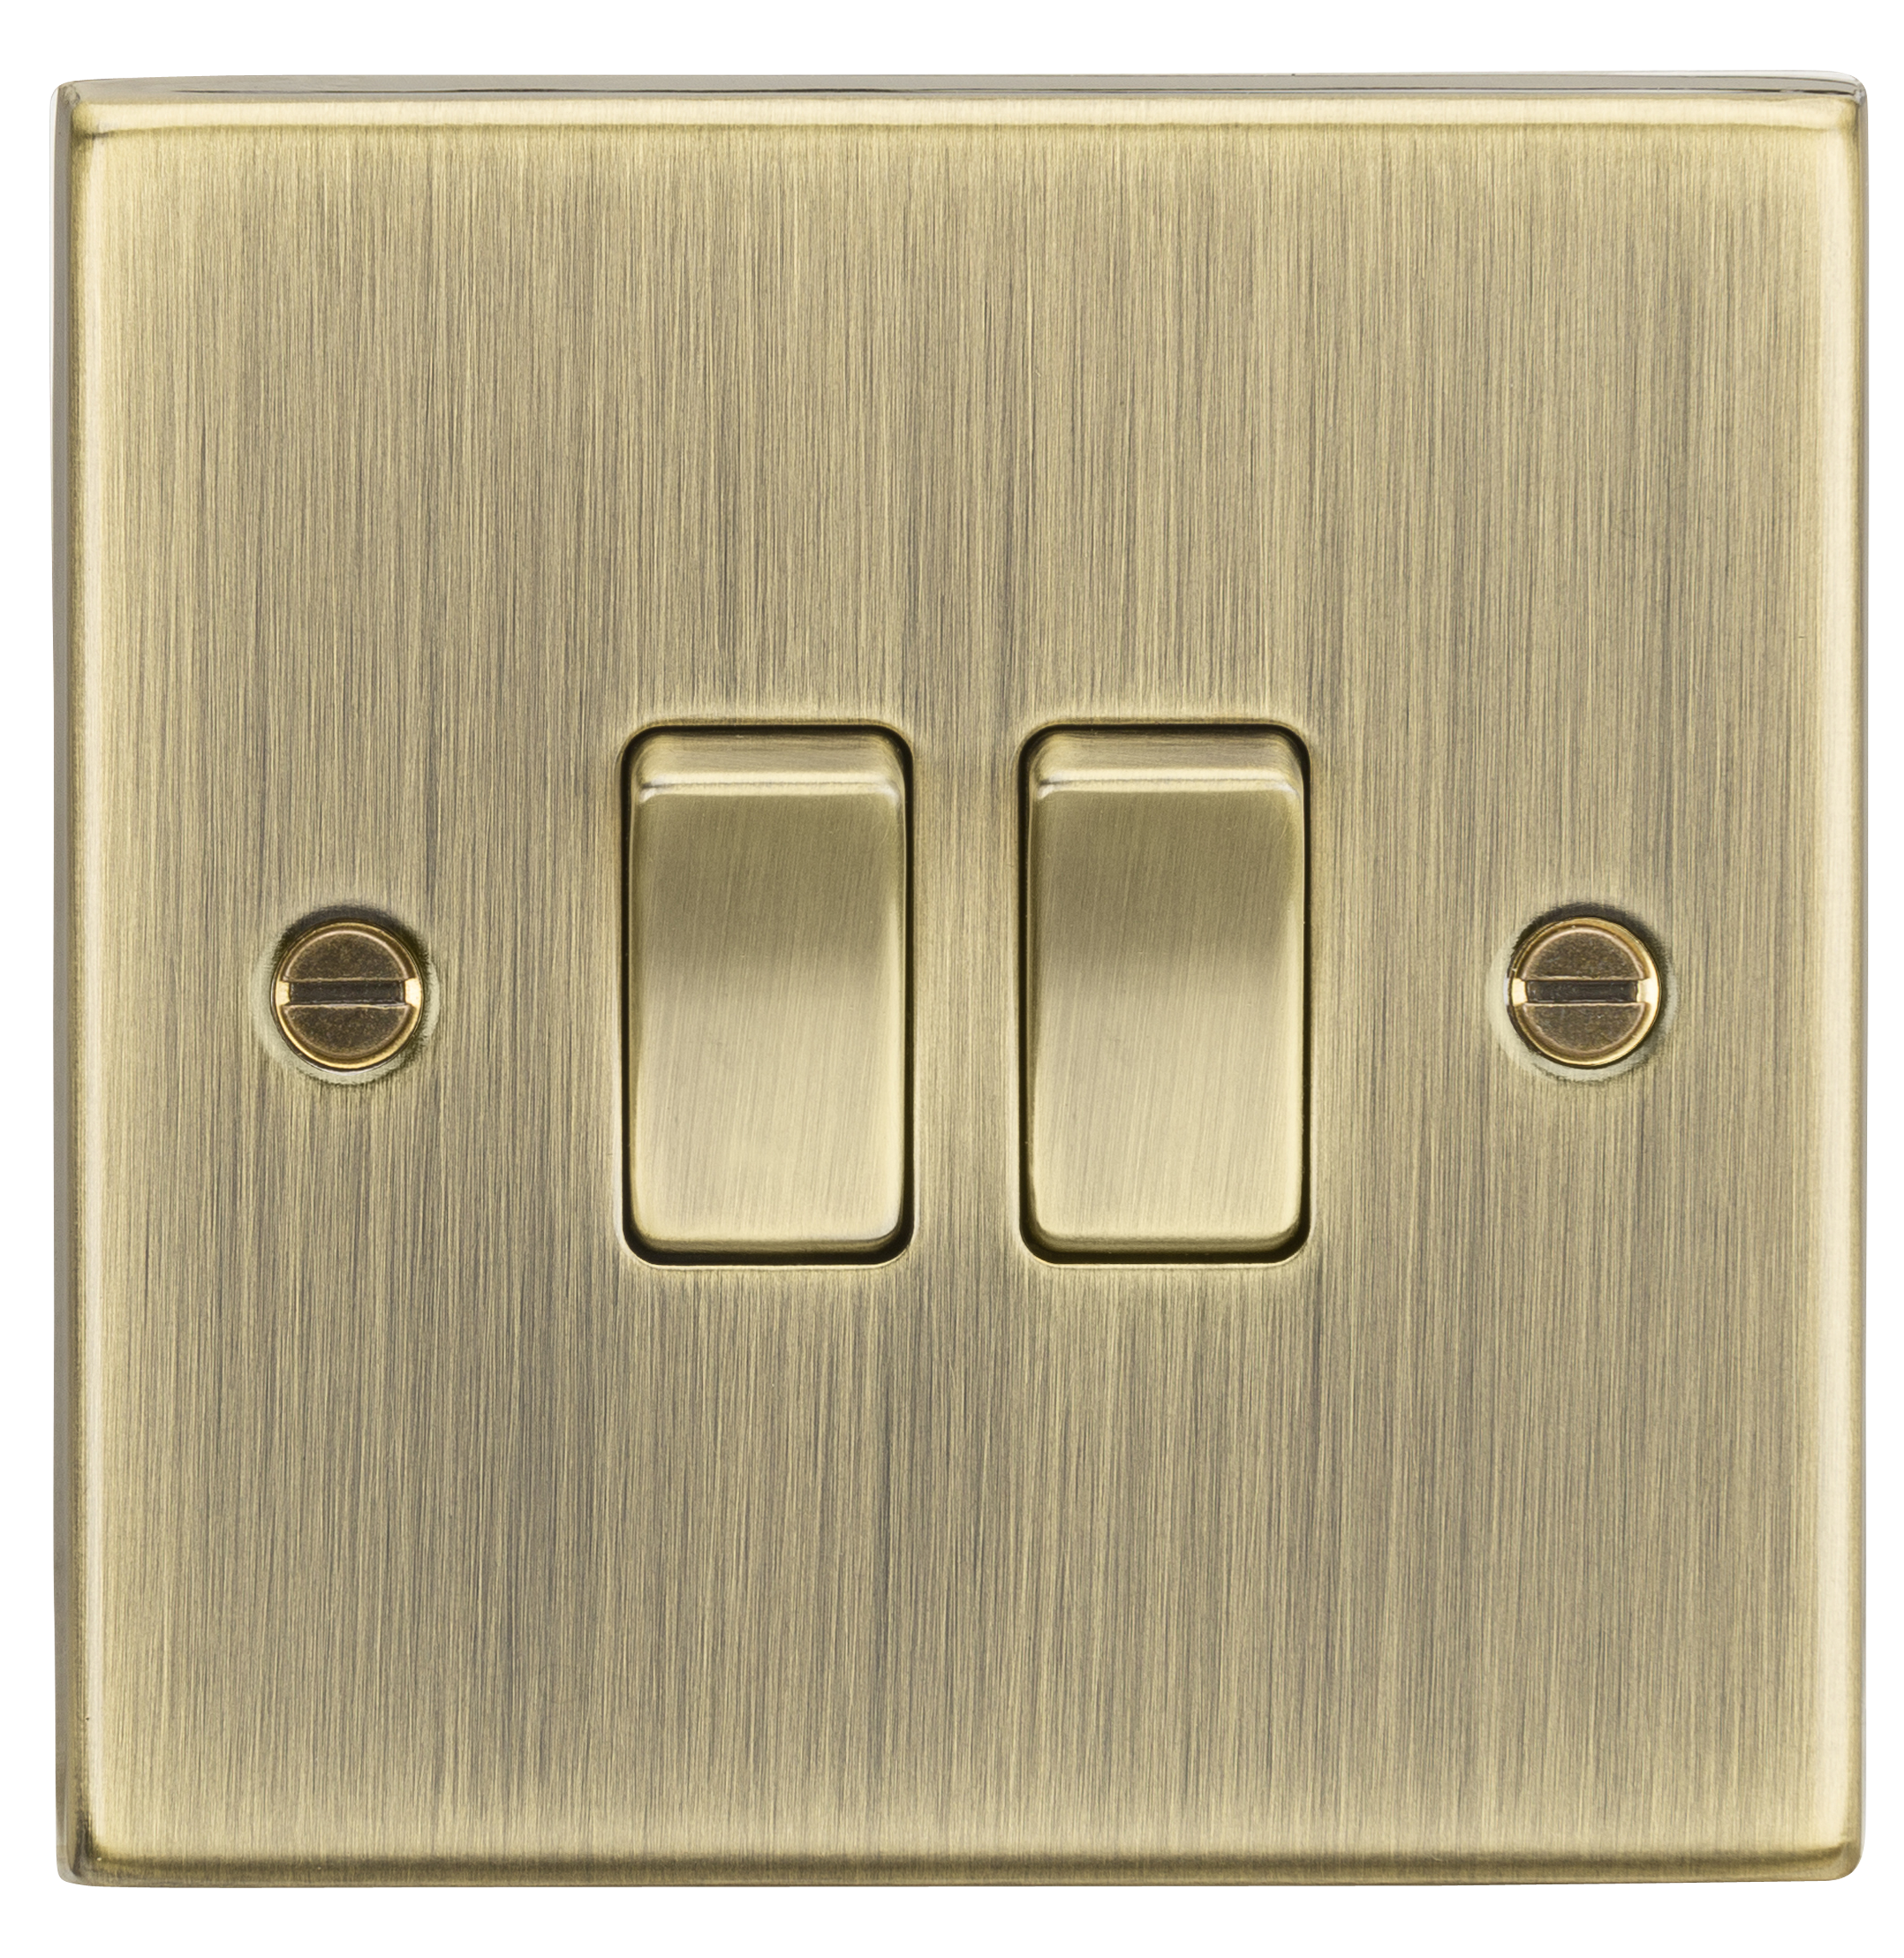 10A 2G 2 Way Plate Switch - Square Edge Antique Brass - CS3AB 